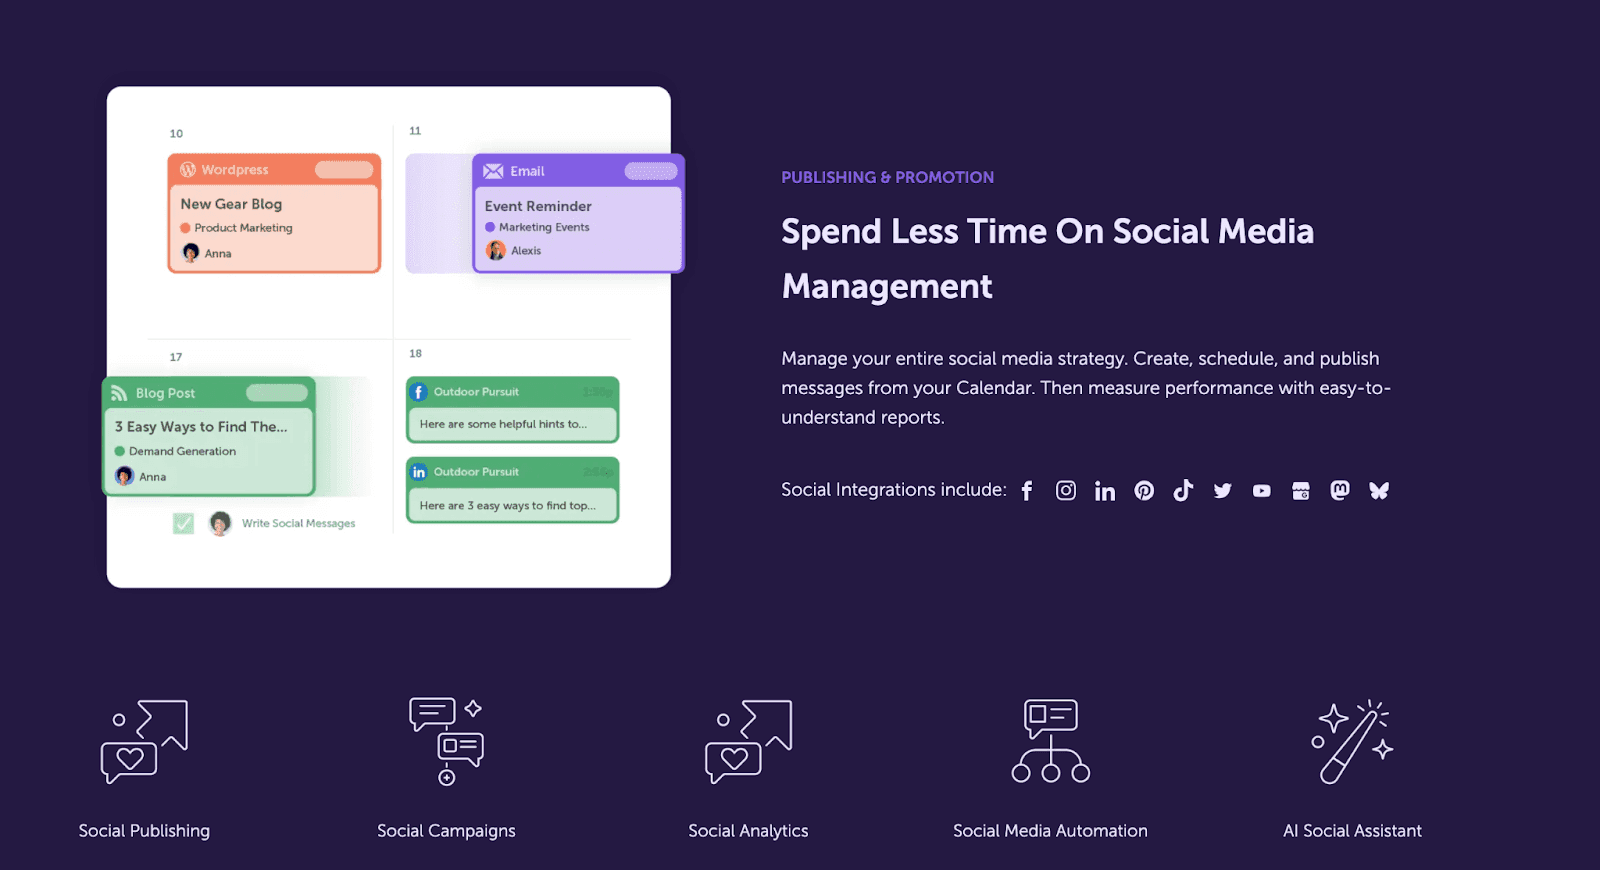 Spend less time on social media management with CoSchedule's Content Calendar